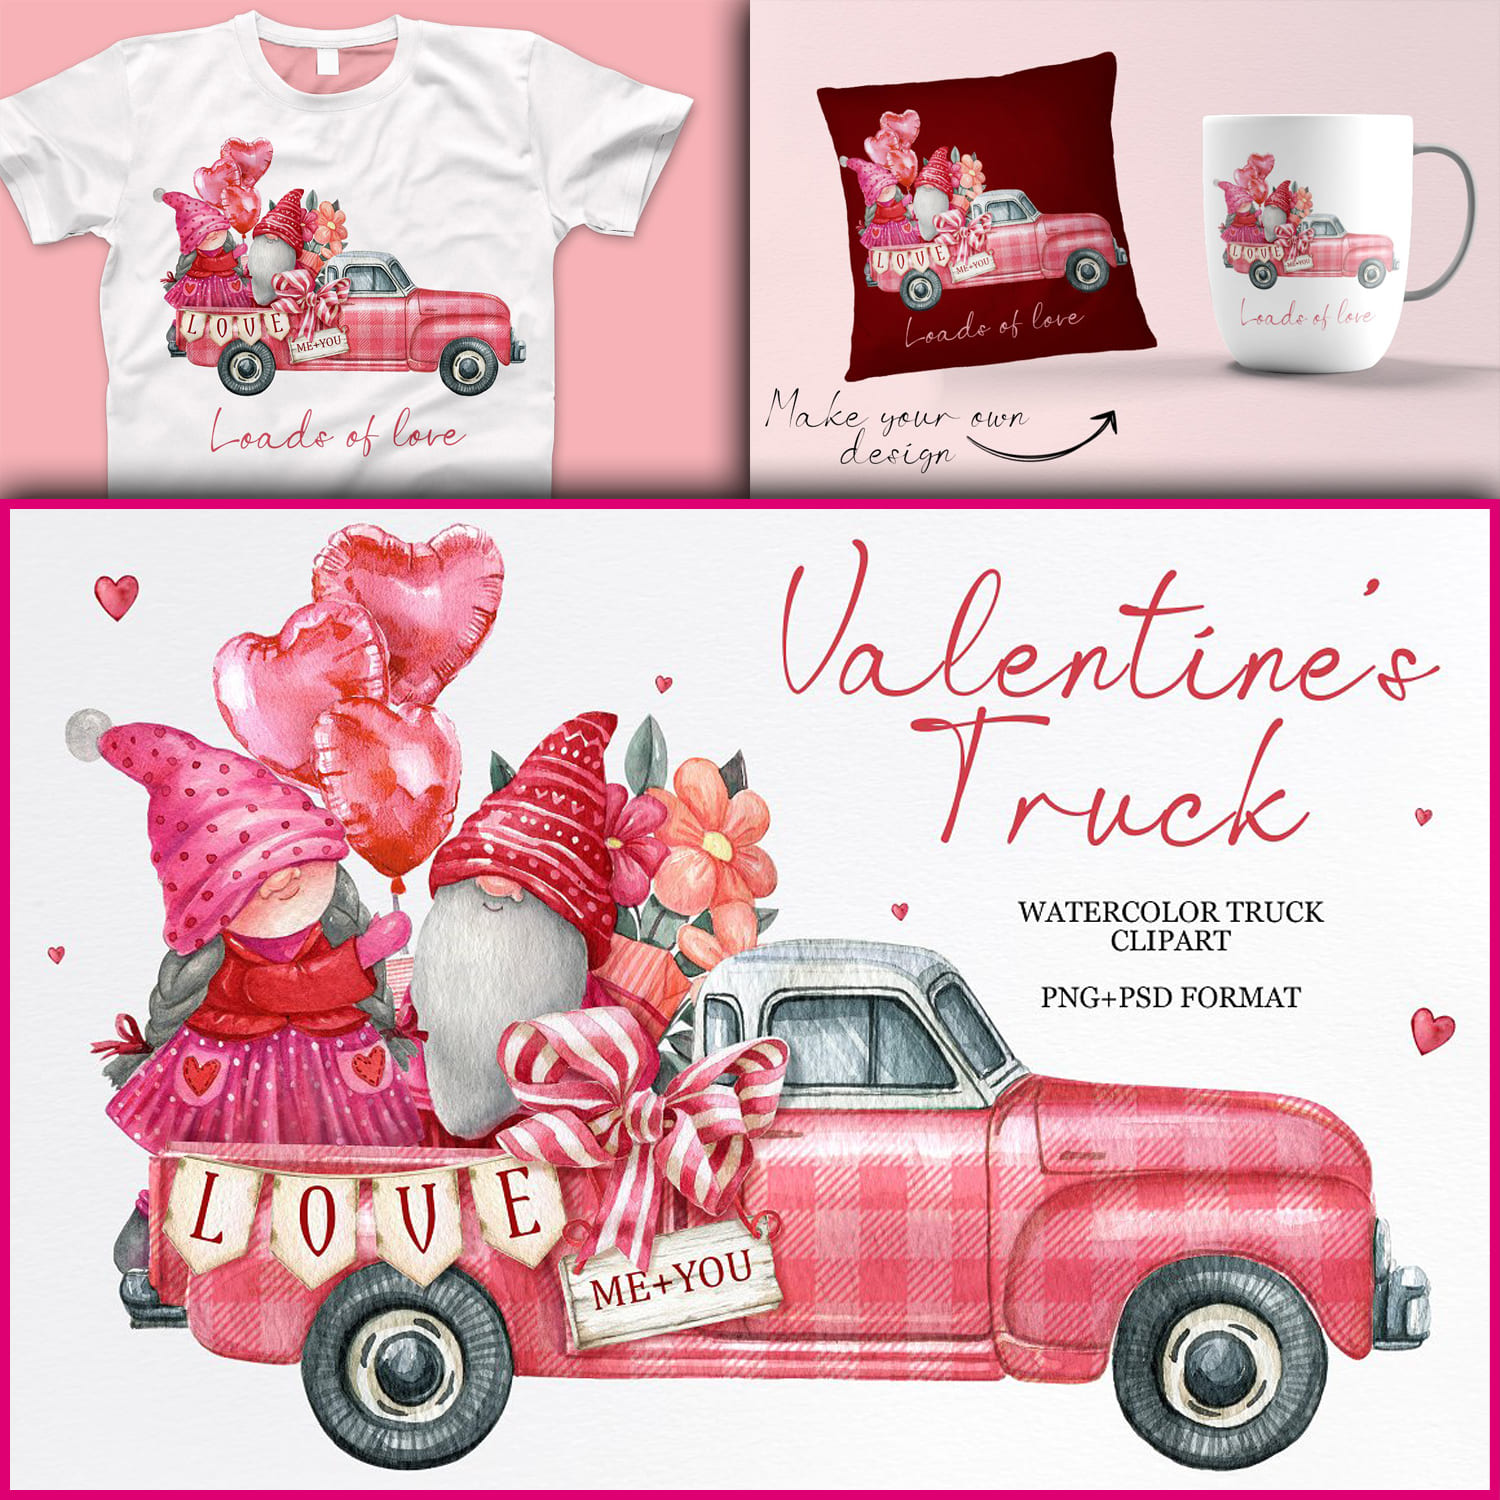 The pink truck is decorated with bows, flowers and heart-shaped balloons.